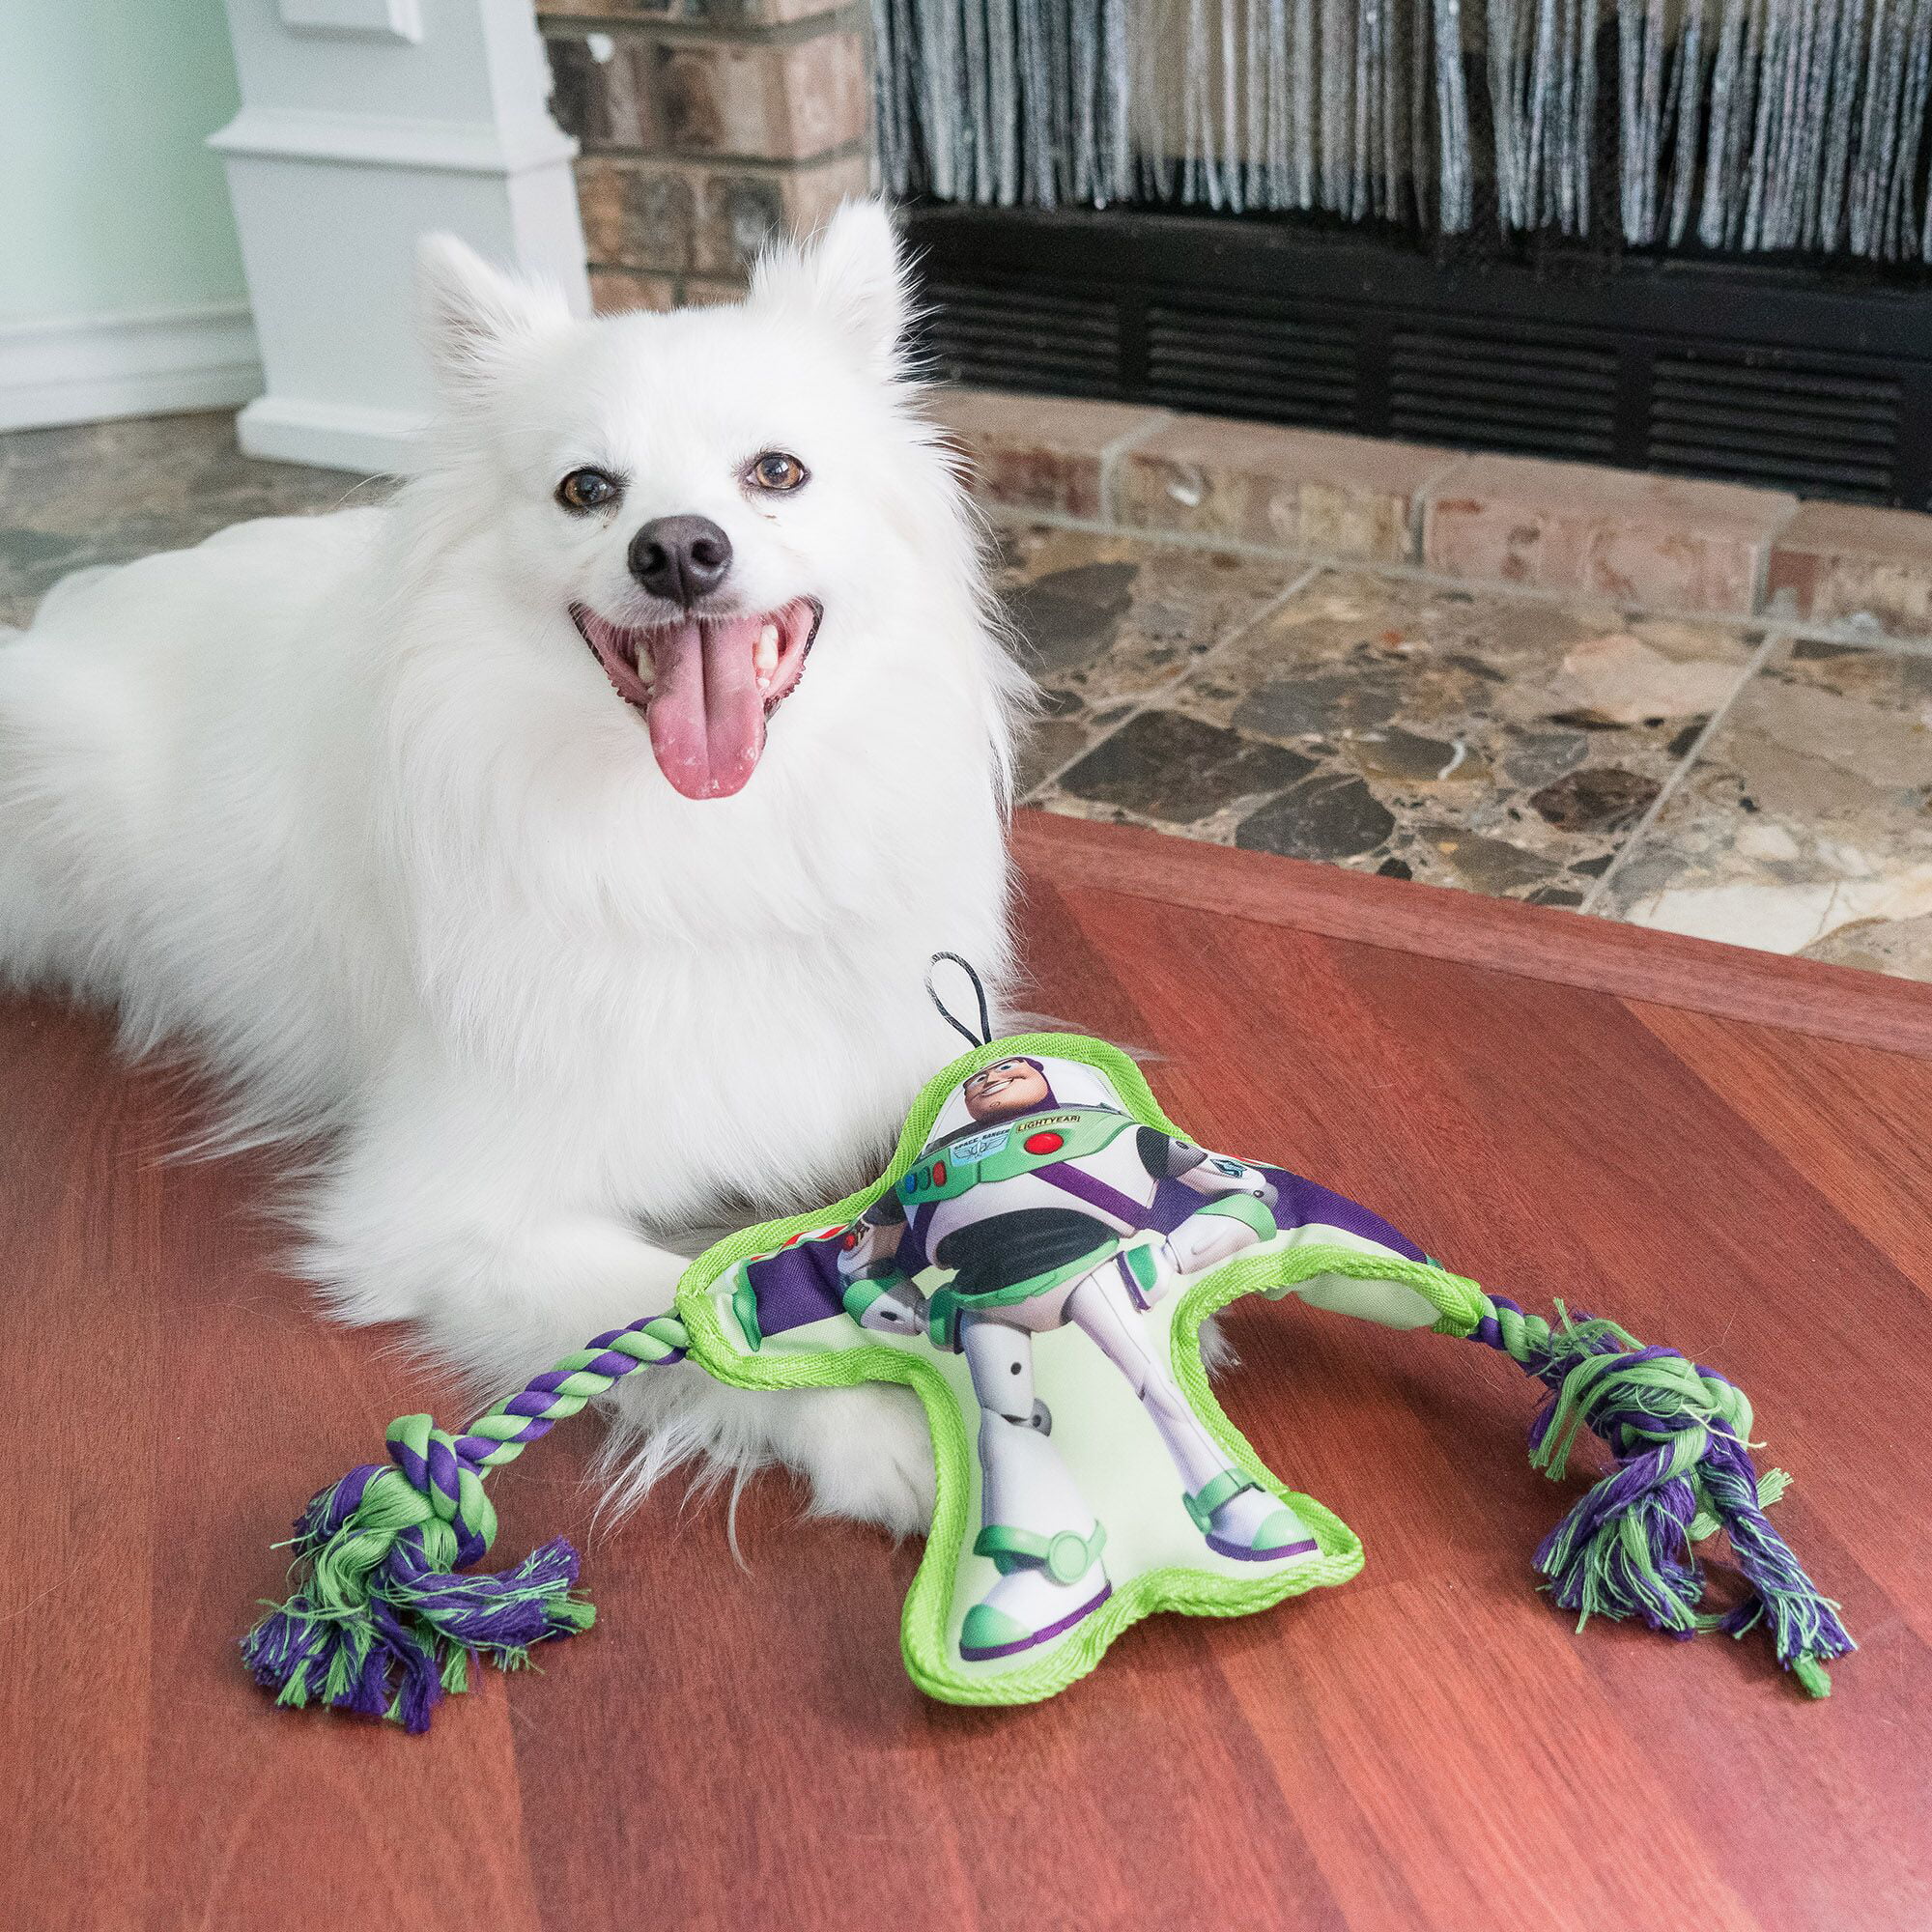 New 'Toy Story 4' Dog Toys From Hyper Pet – Toy Story Fangirl